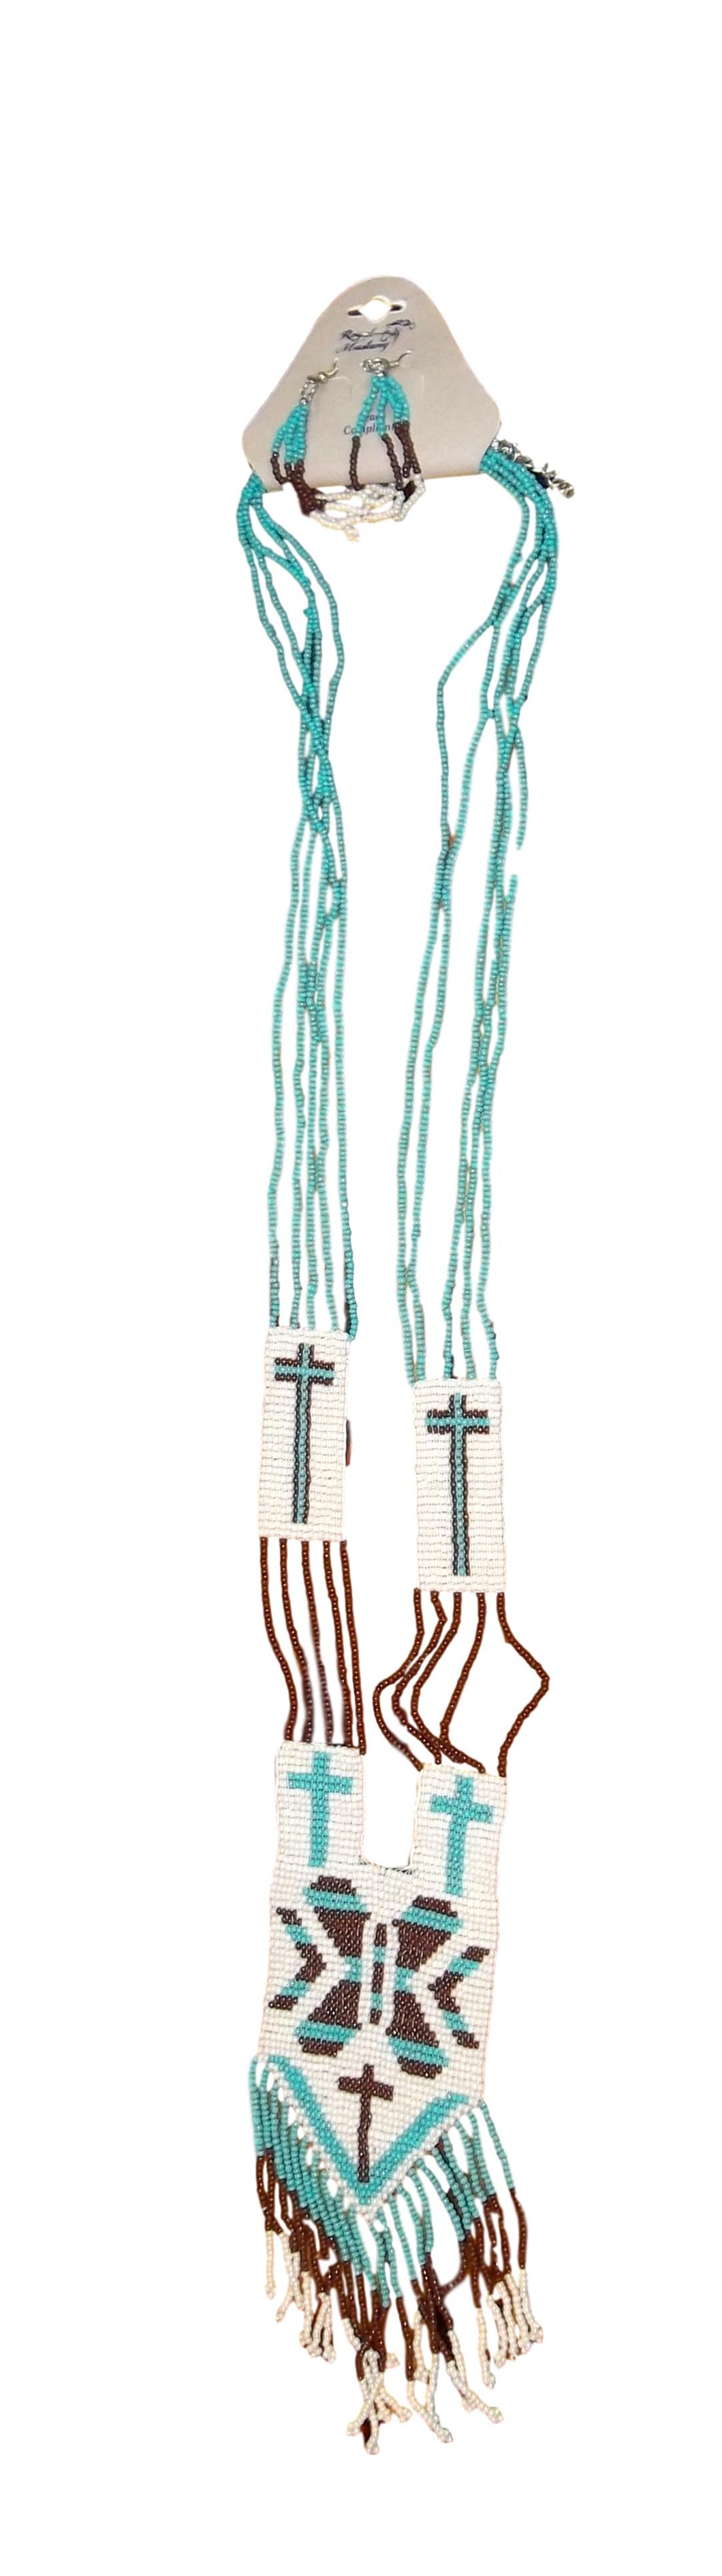 Long Teal/Brown/White Necklace